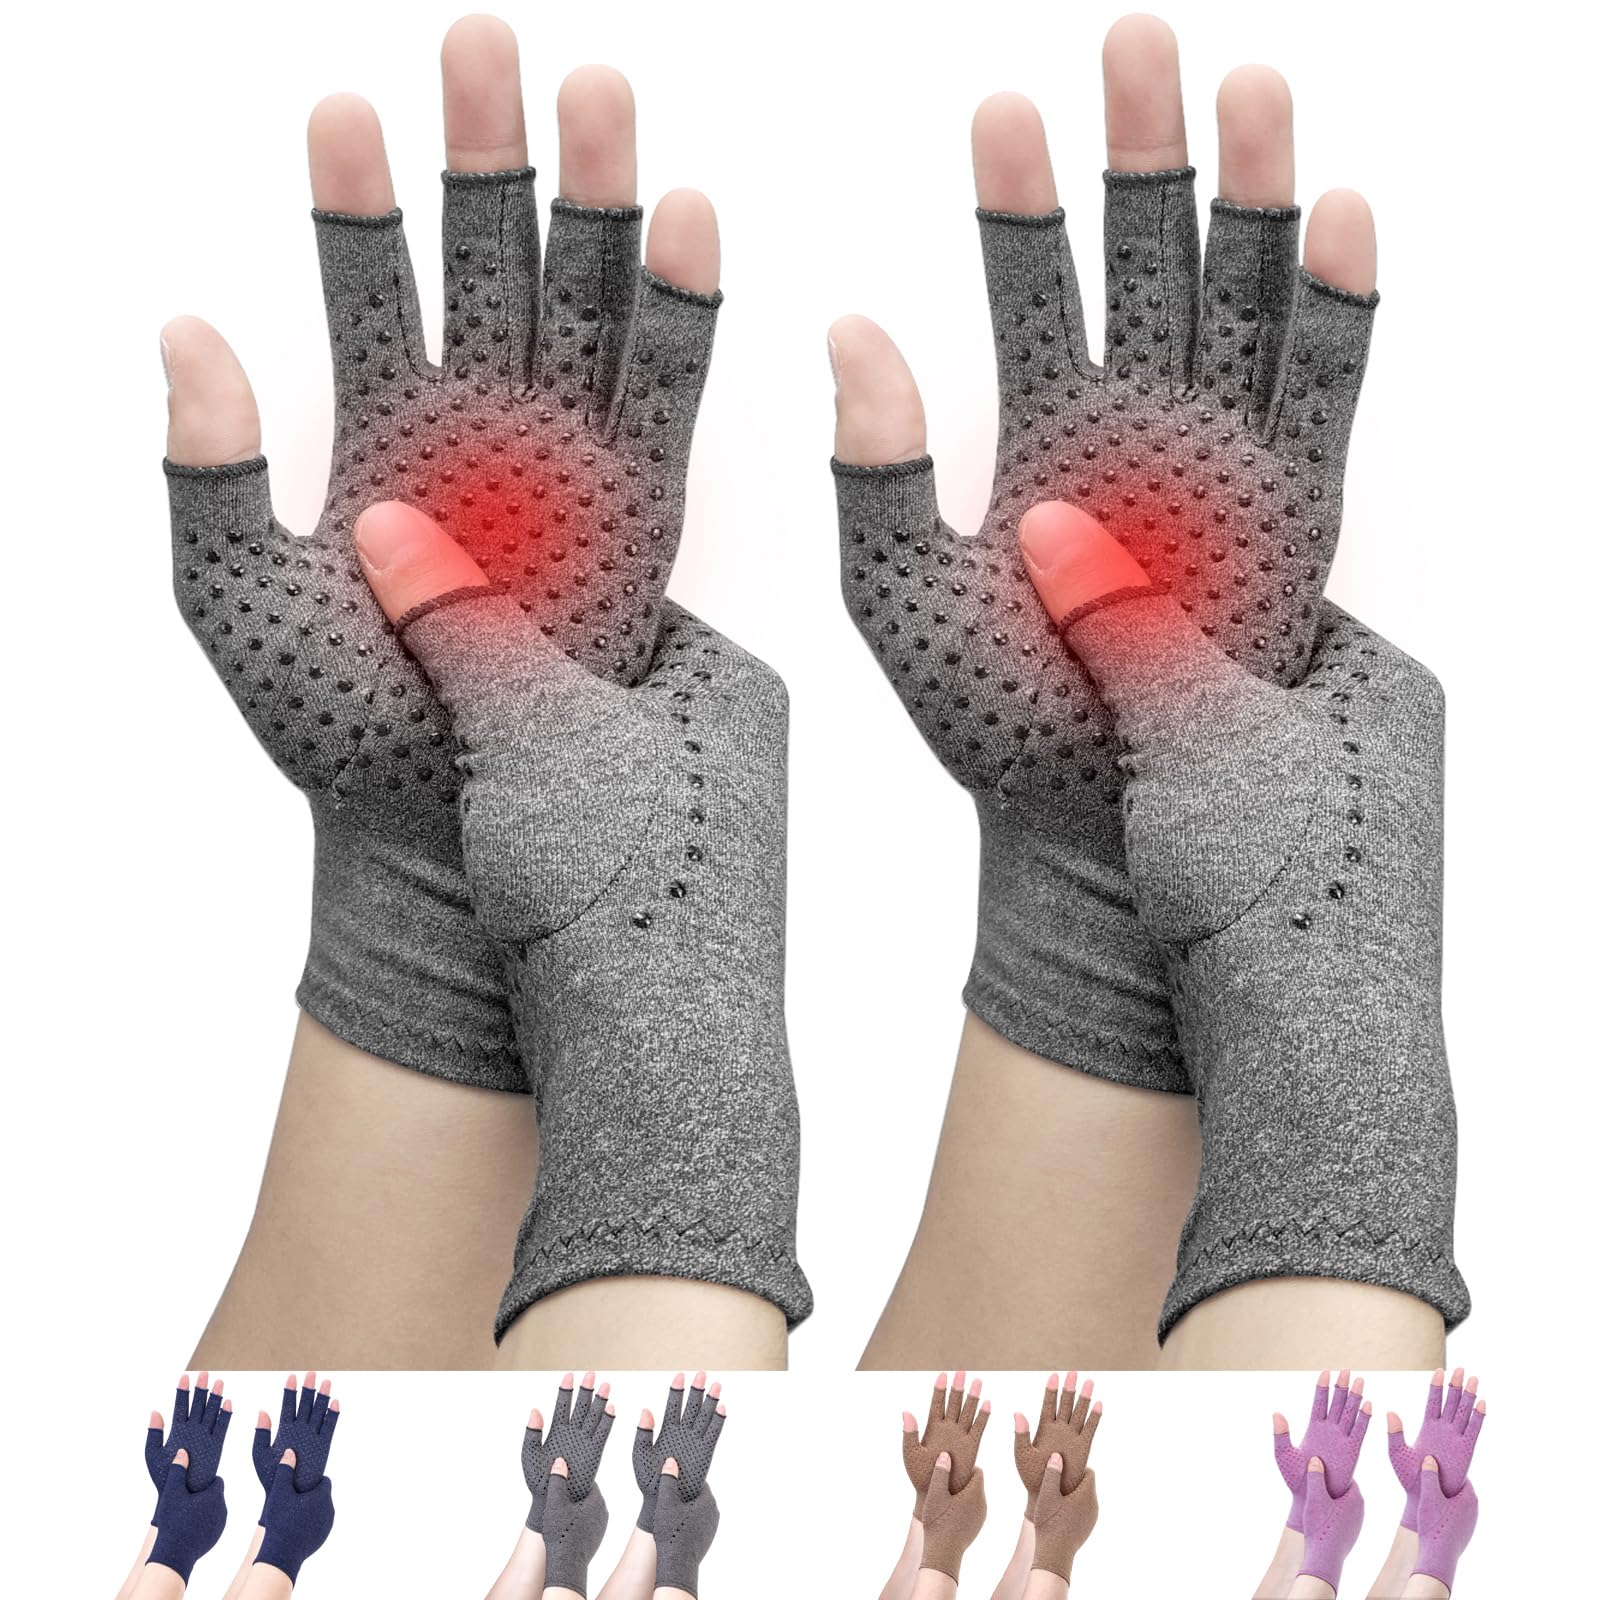 Comfy Brace Arthritis Hand Compression Gloves ・Comfy Fit, Fingerless  Design, Breathable & Moisture Wicking Fabric ・Alleviate Rheumatoid Pains,  Ease Mu 